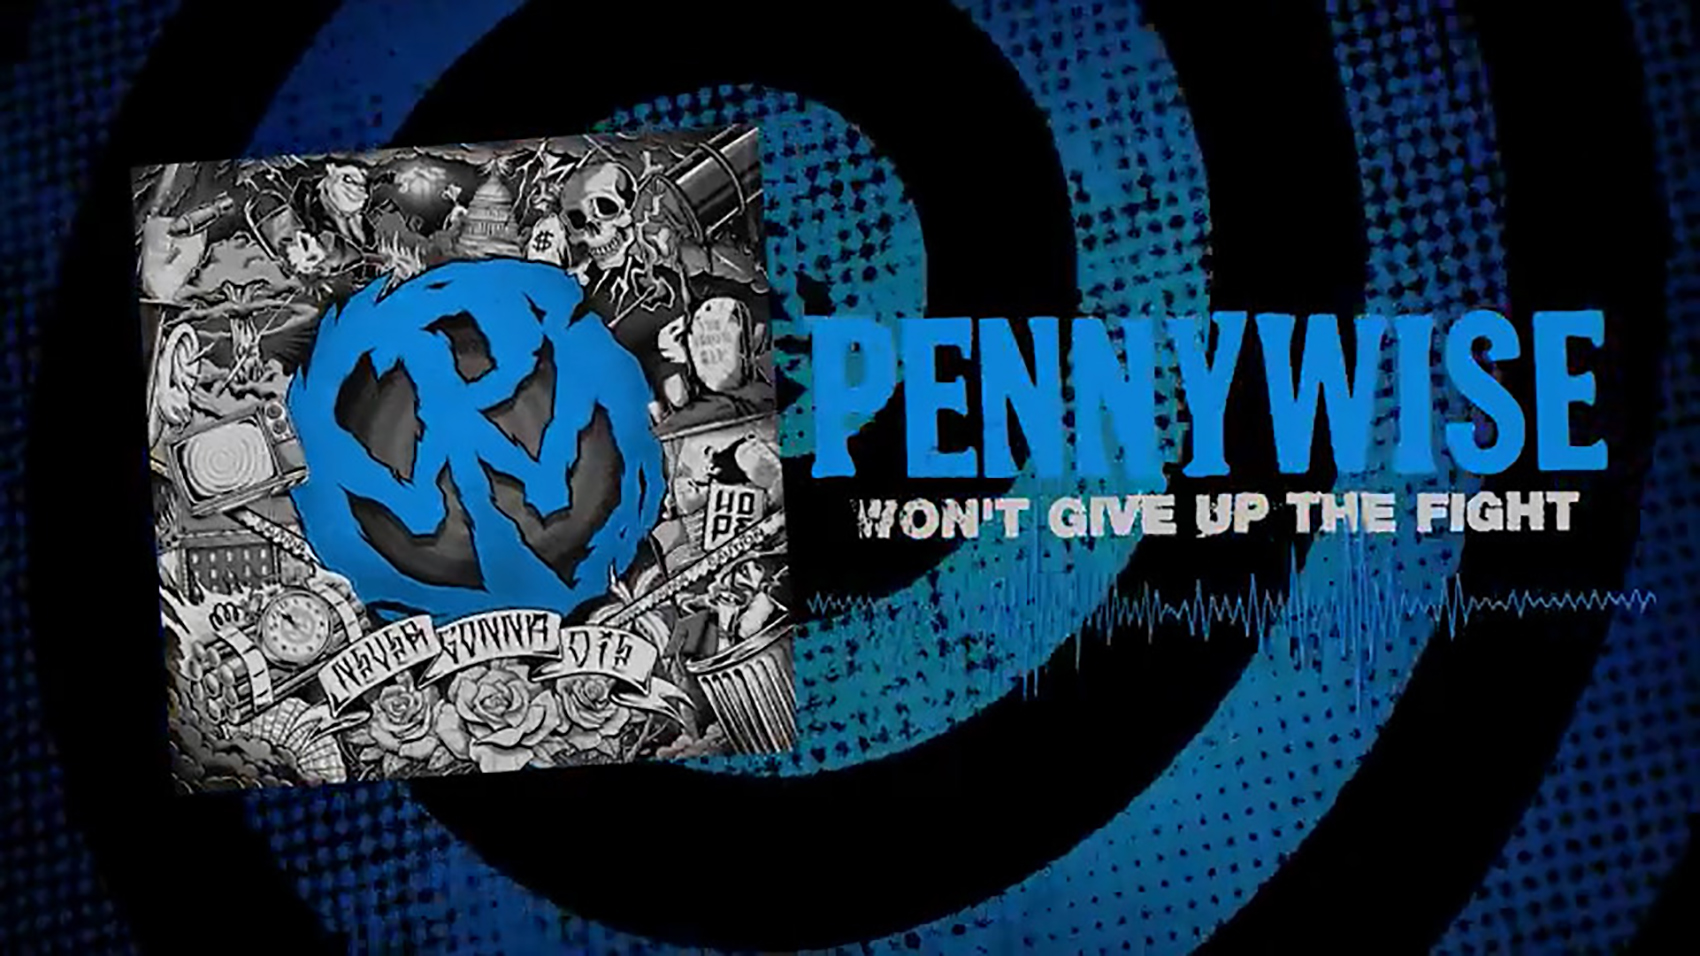 Never gonna be. Pennywise - can't be ignored альбом. Gonna die. Not gonna die never.